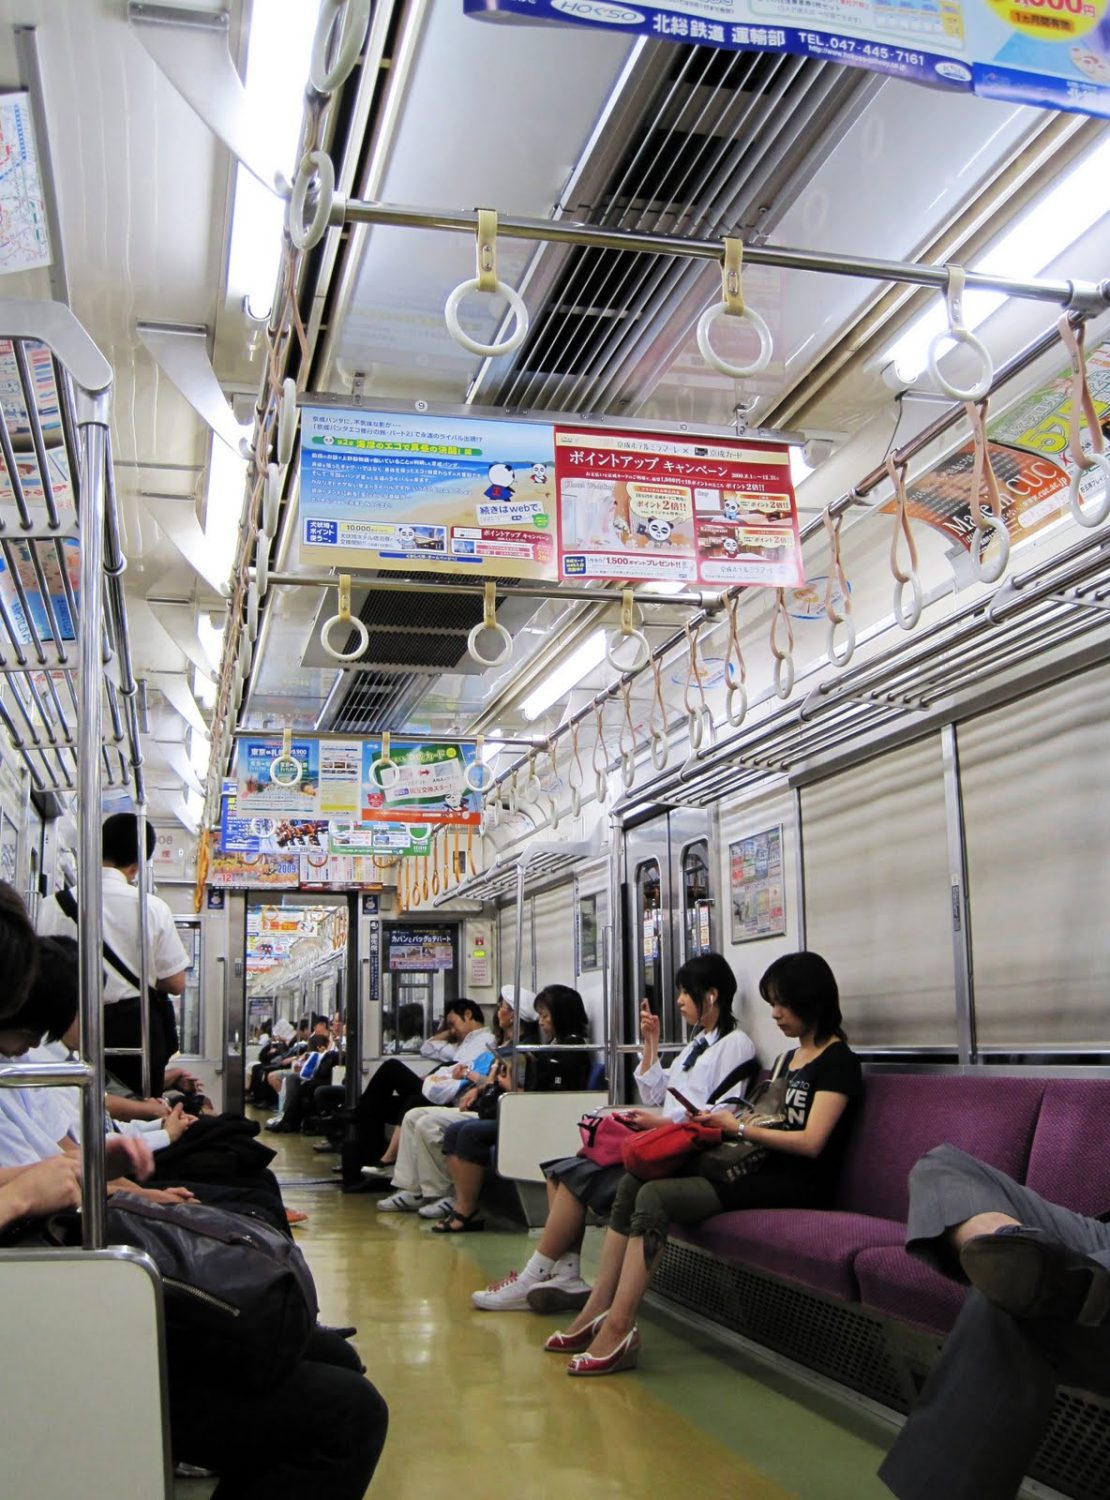 The subway in Tokyo, Japan.